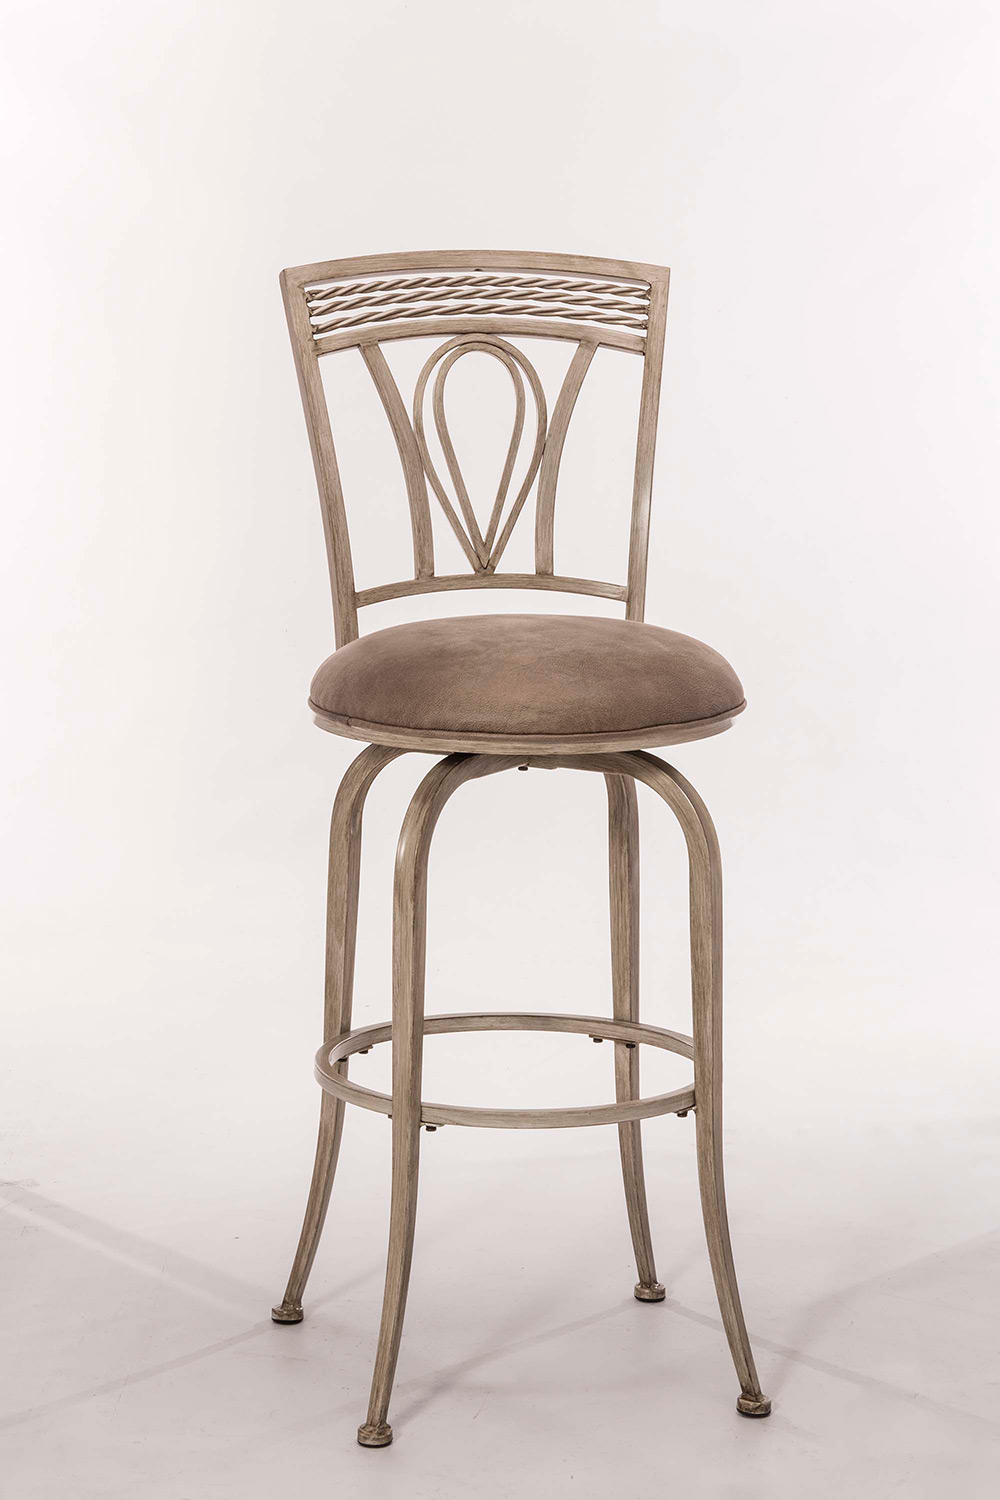 Hillsdale Napier Swivel Counter Stool - Aged Ivory